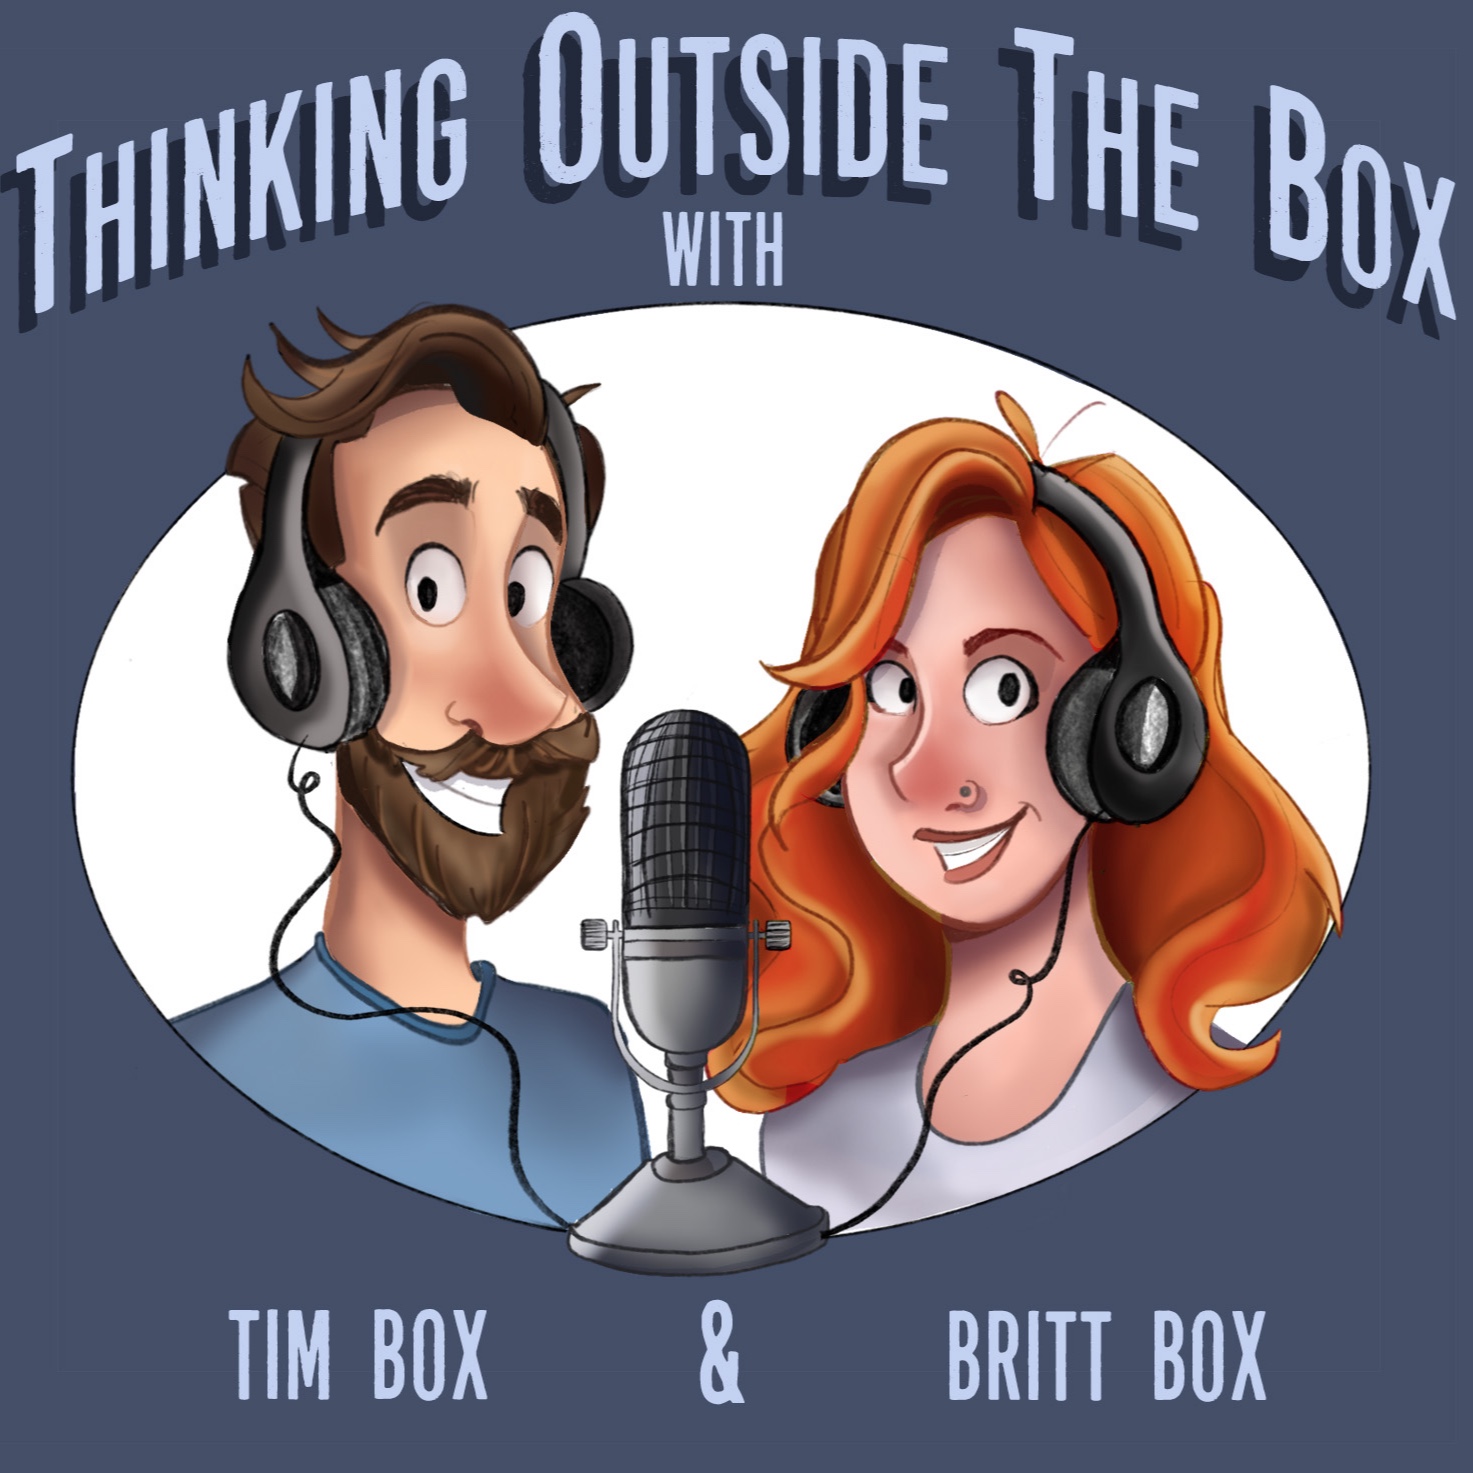 Thinking Outside The Box with Tim and Britt Box